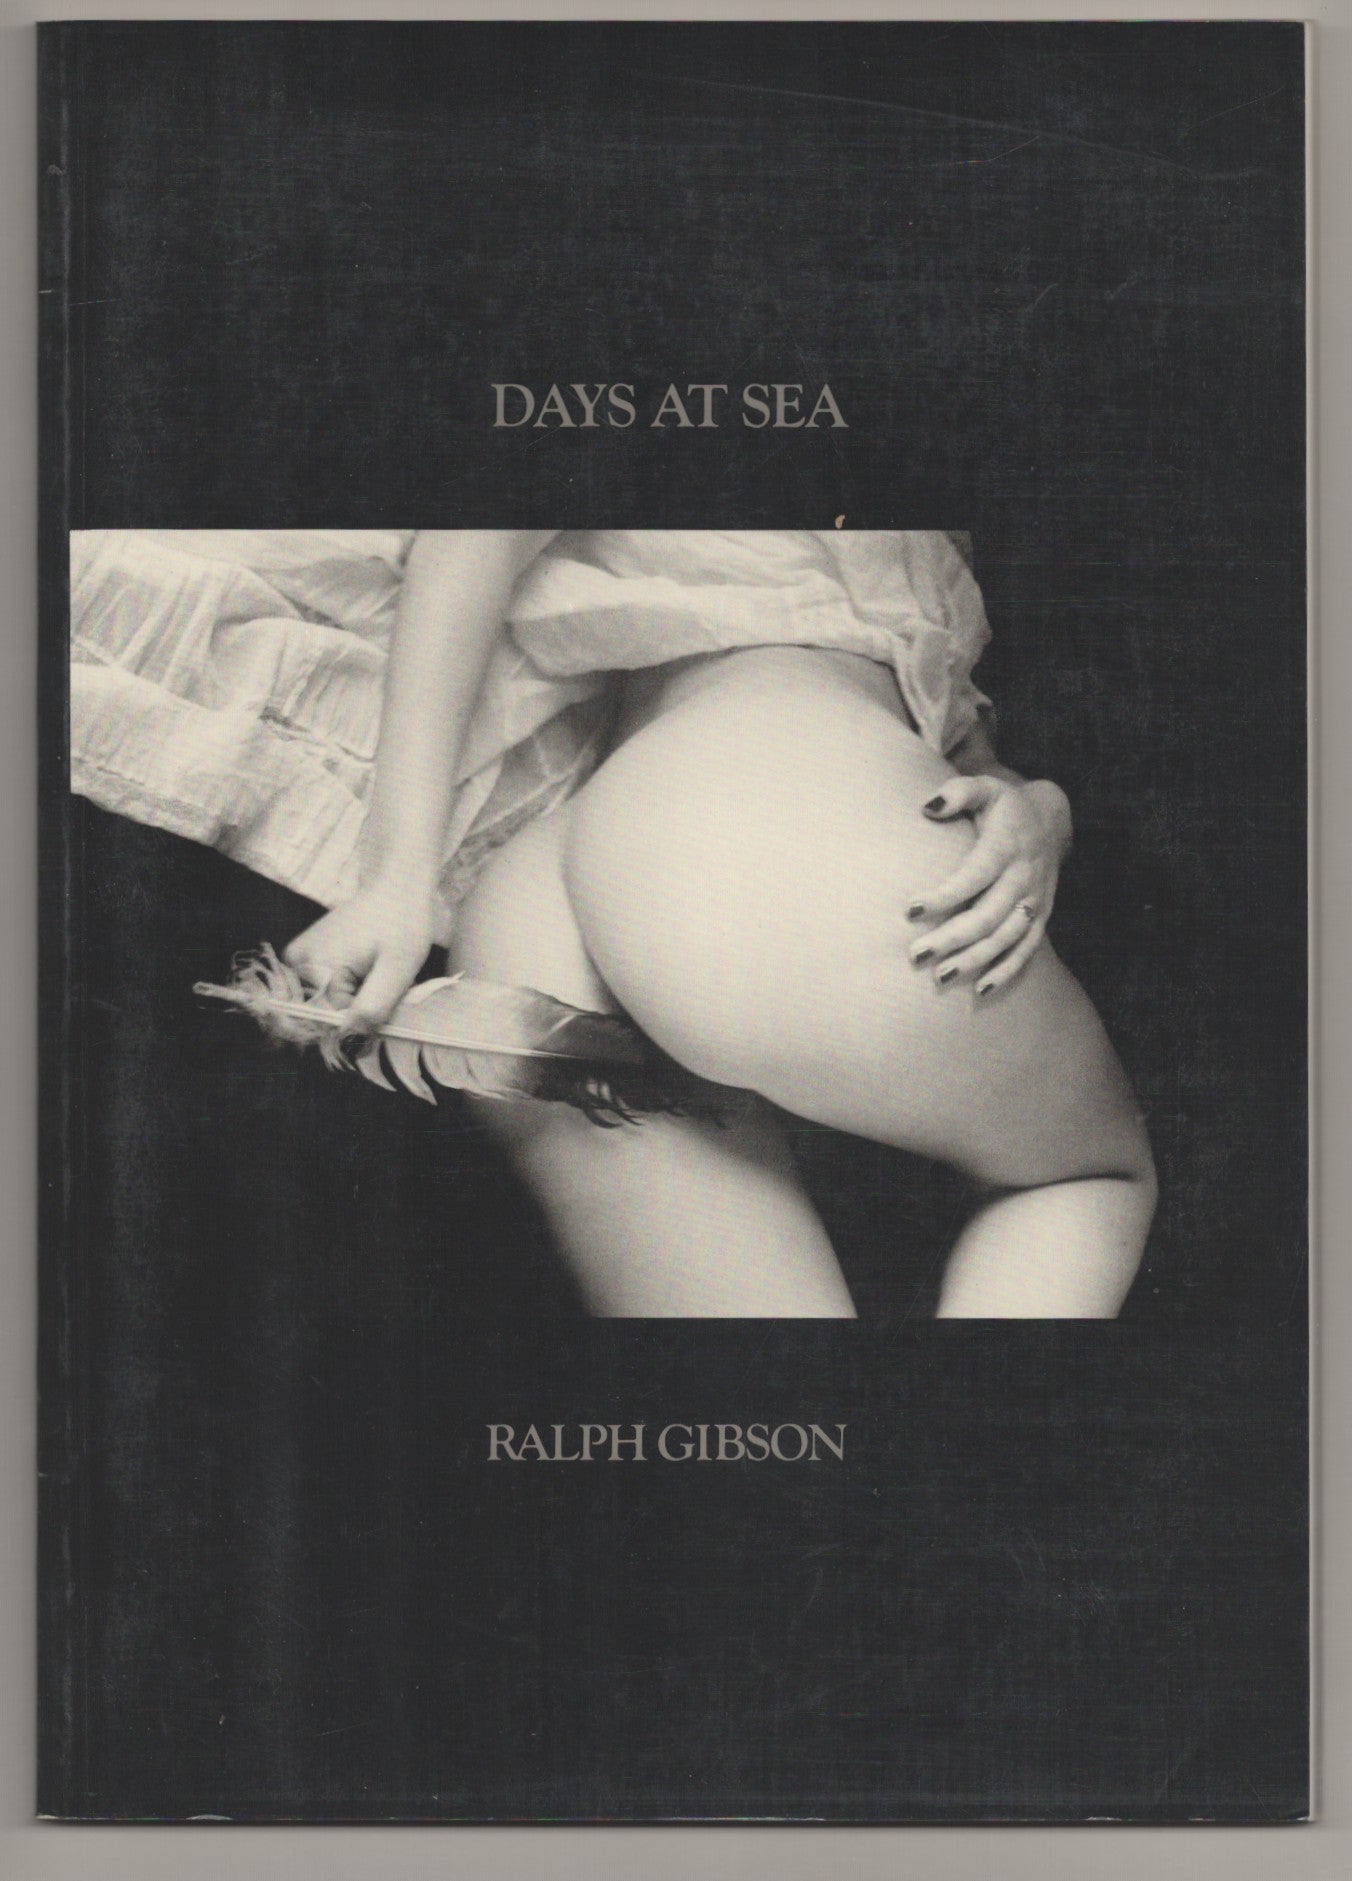 Days At Sea by Ralph GIBSON on Jeff Hirsch Books